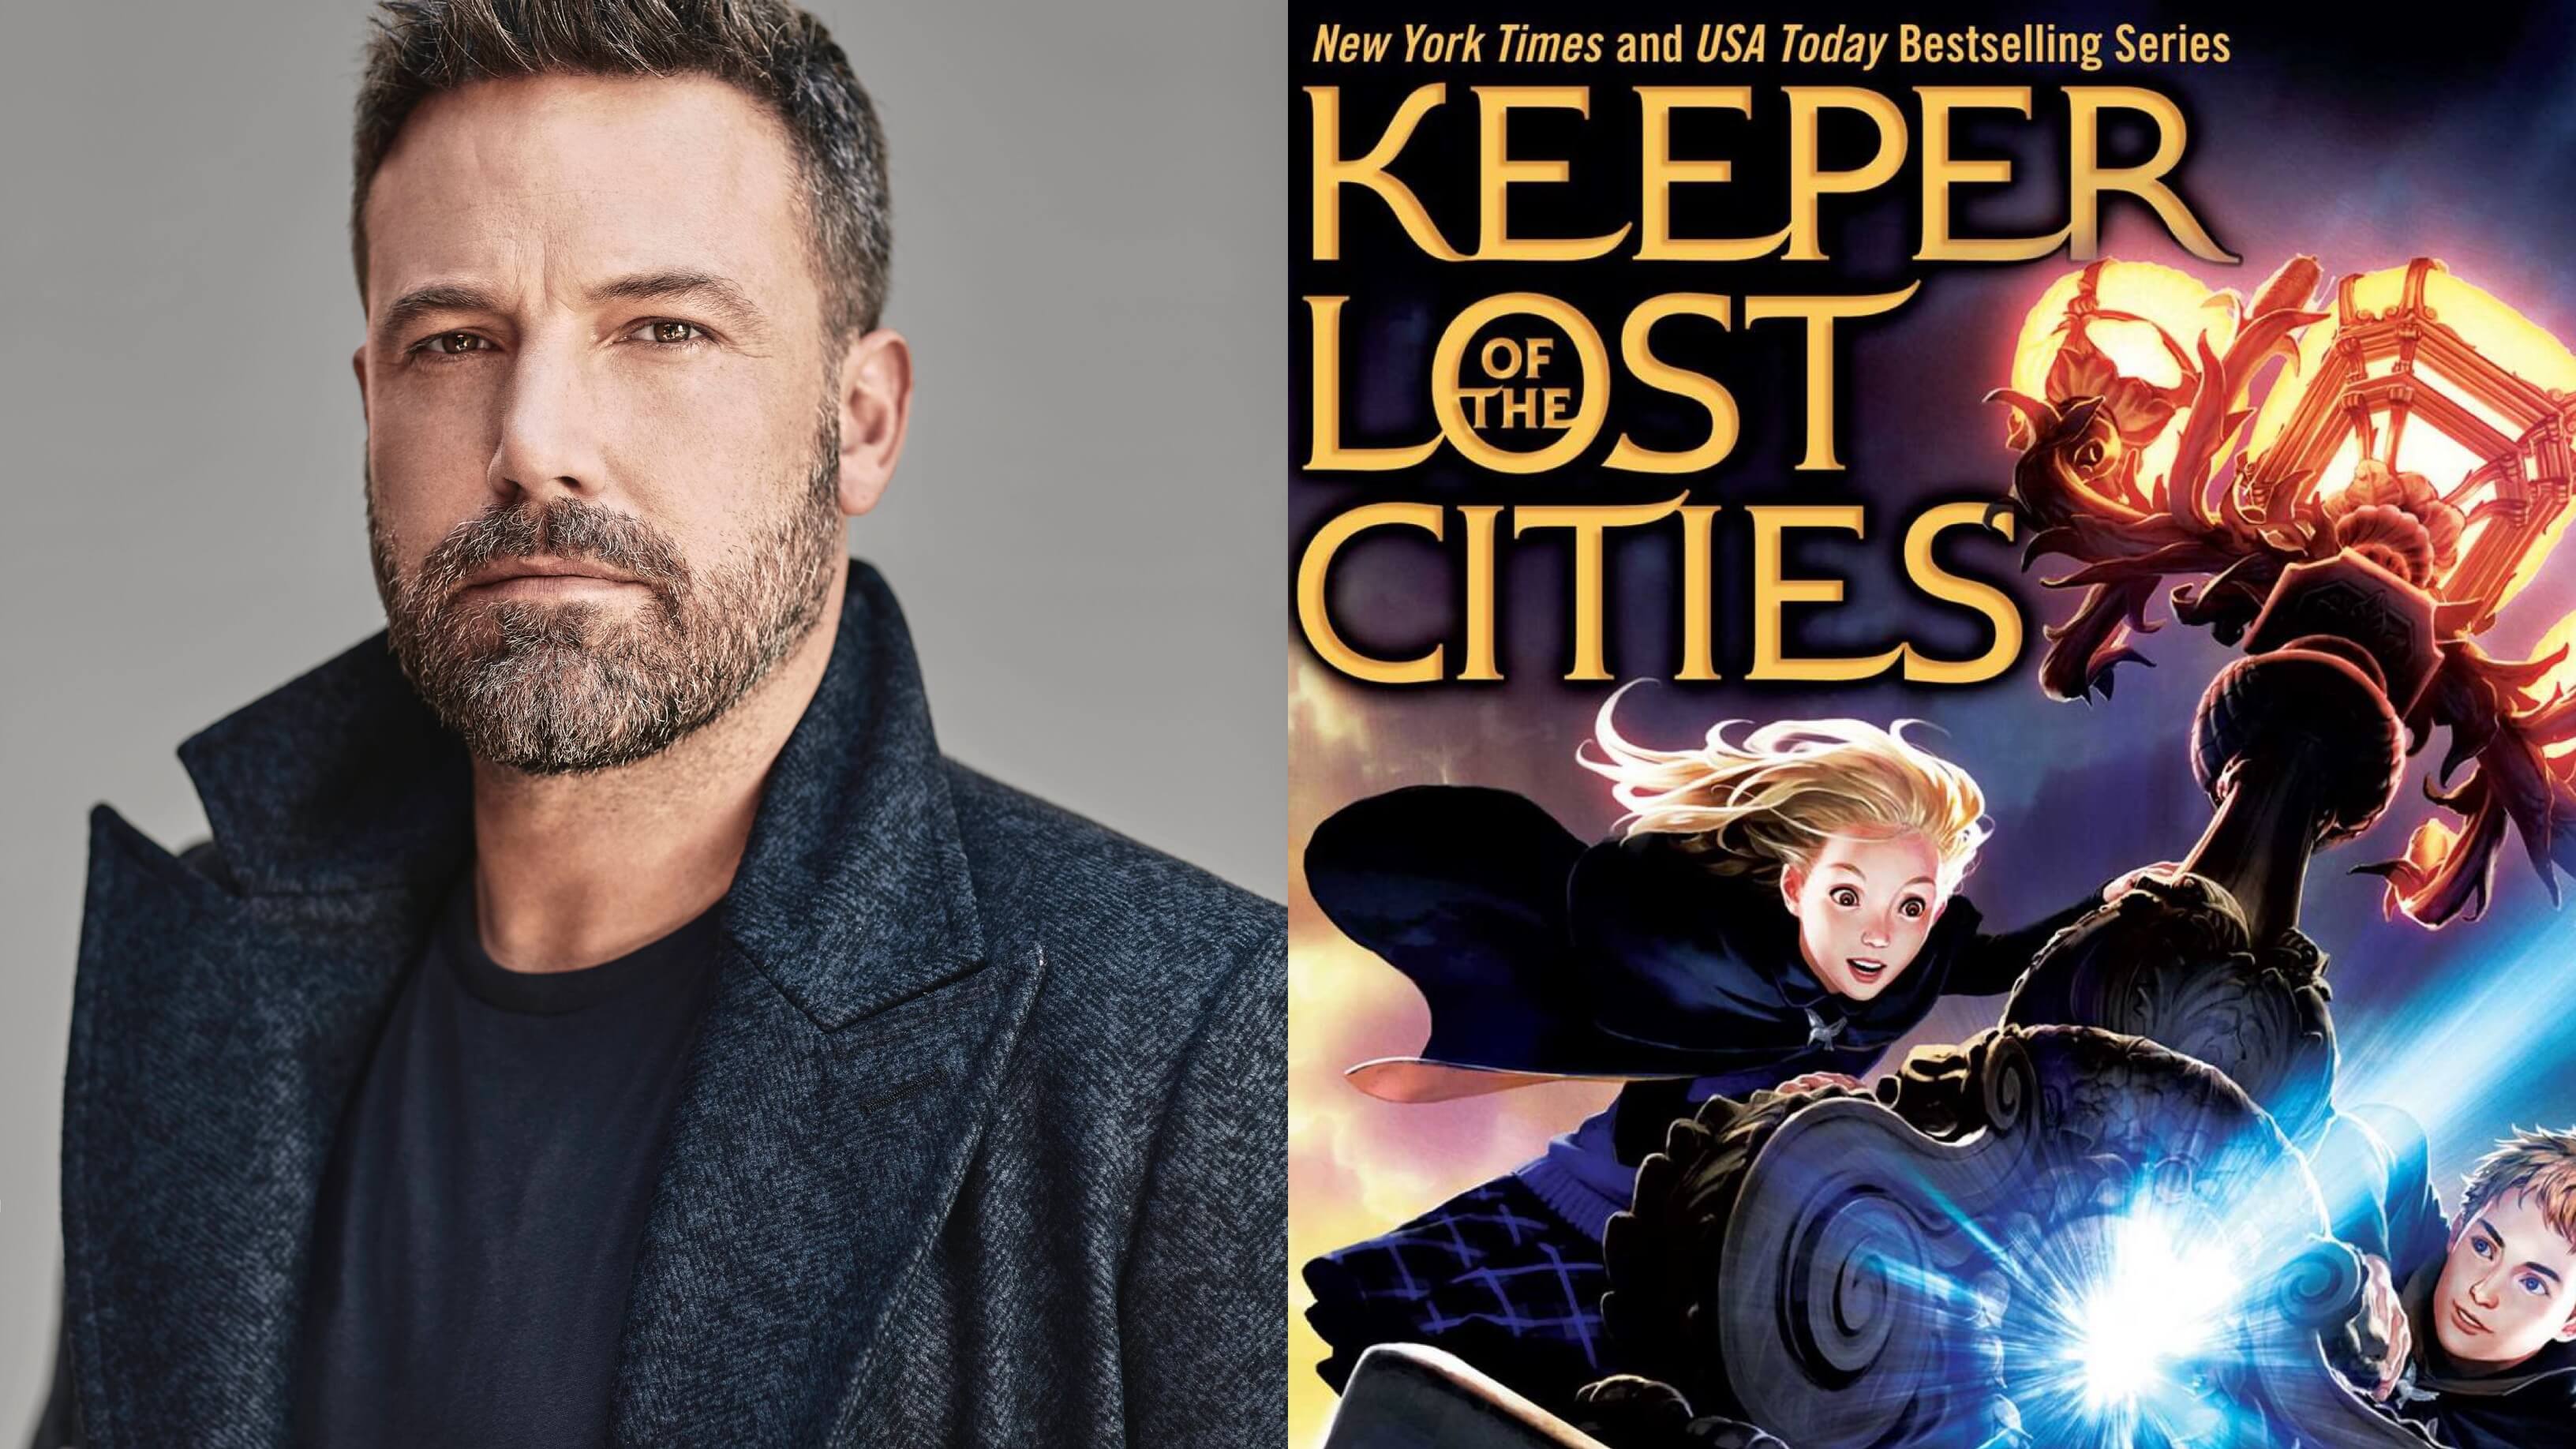 Ben Affleck to Direct Disney’s ‘Keeper of the Lost Cities’